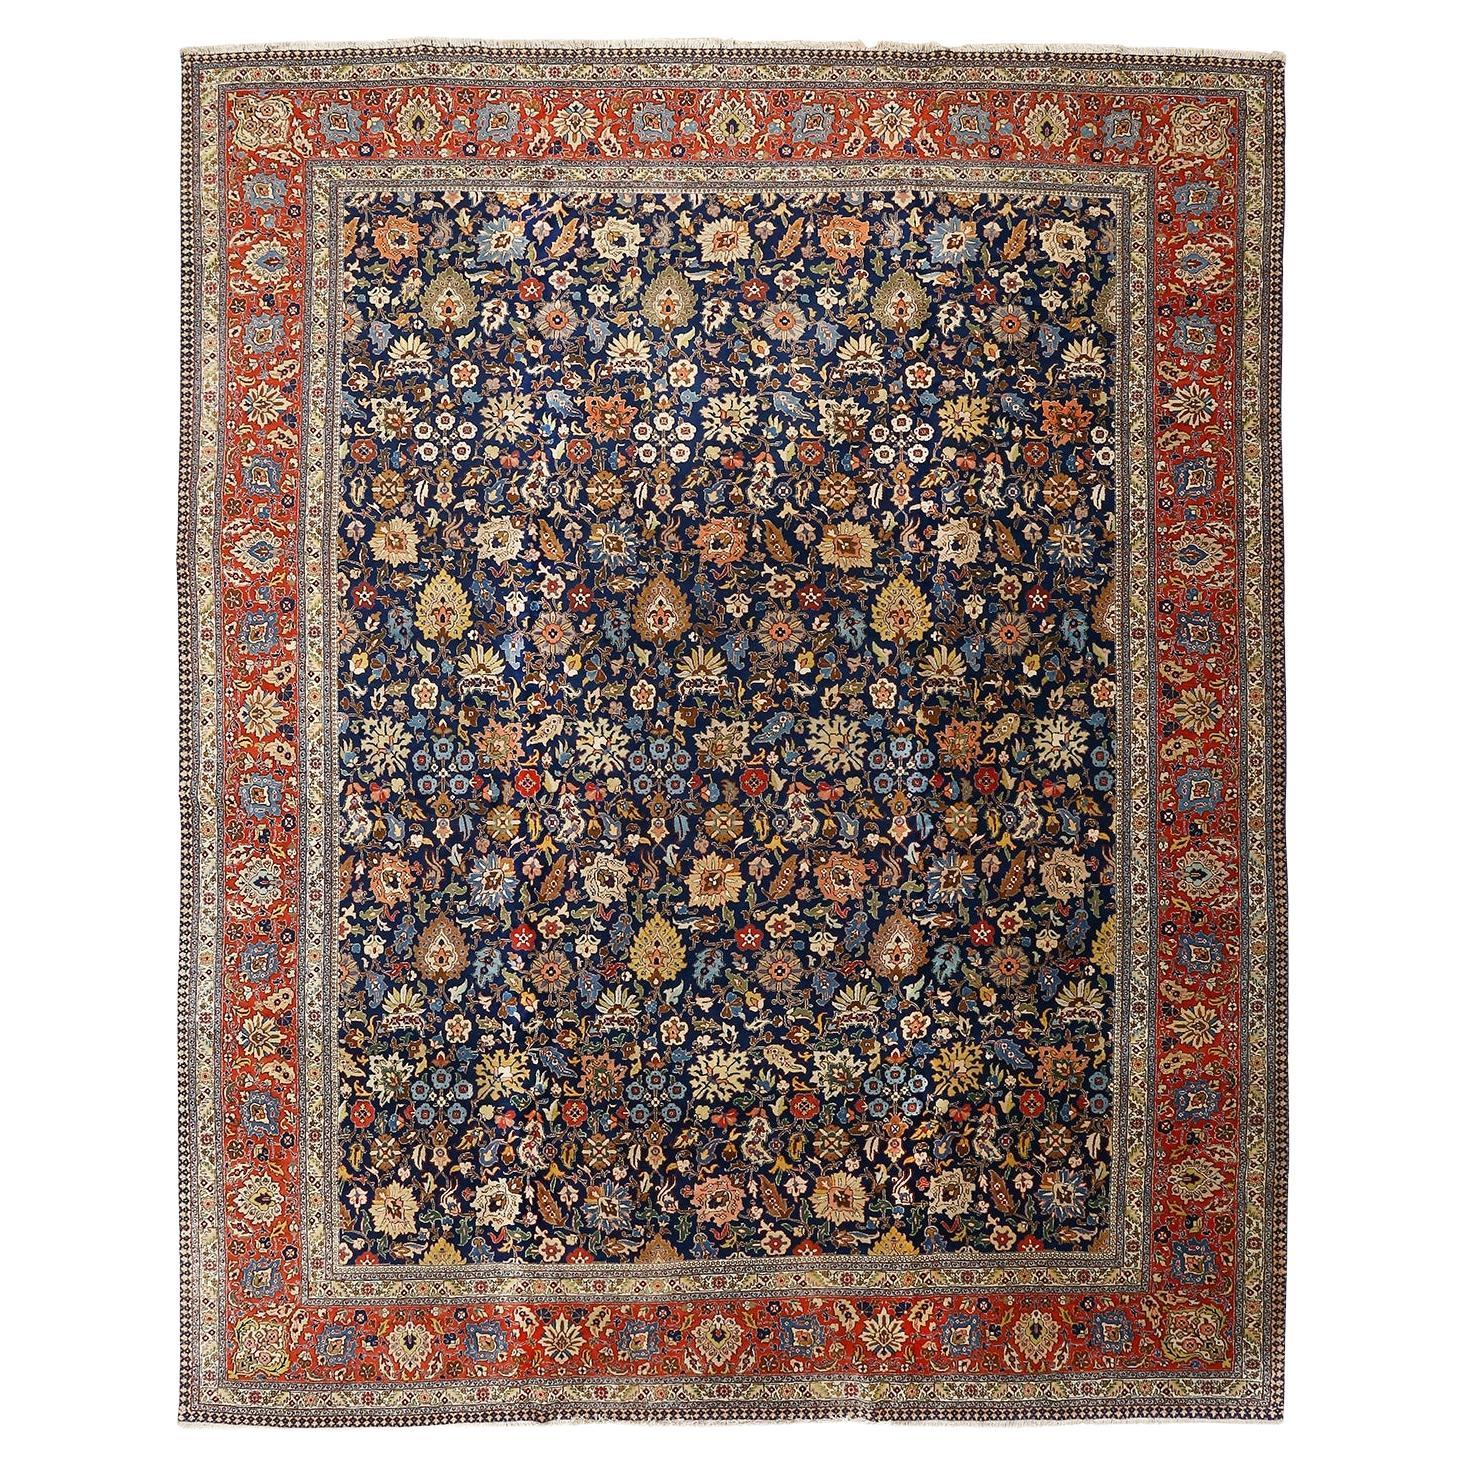 Damoka Collection Antique Persian Tabriz - Size: 16 ft 3 in x 12 ft 10 in